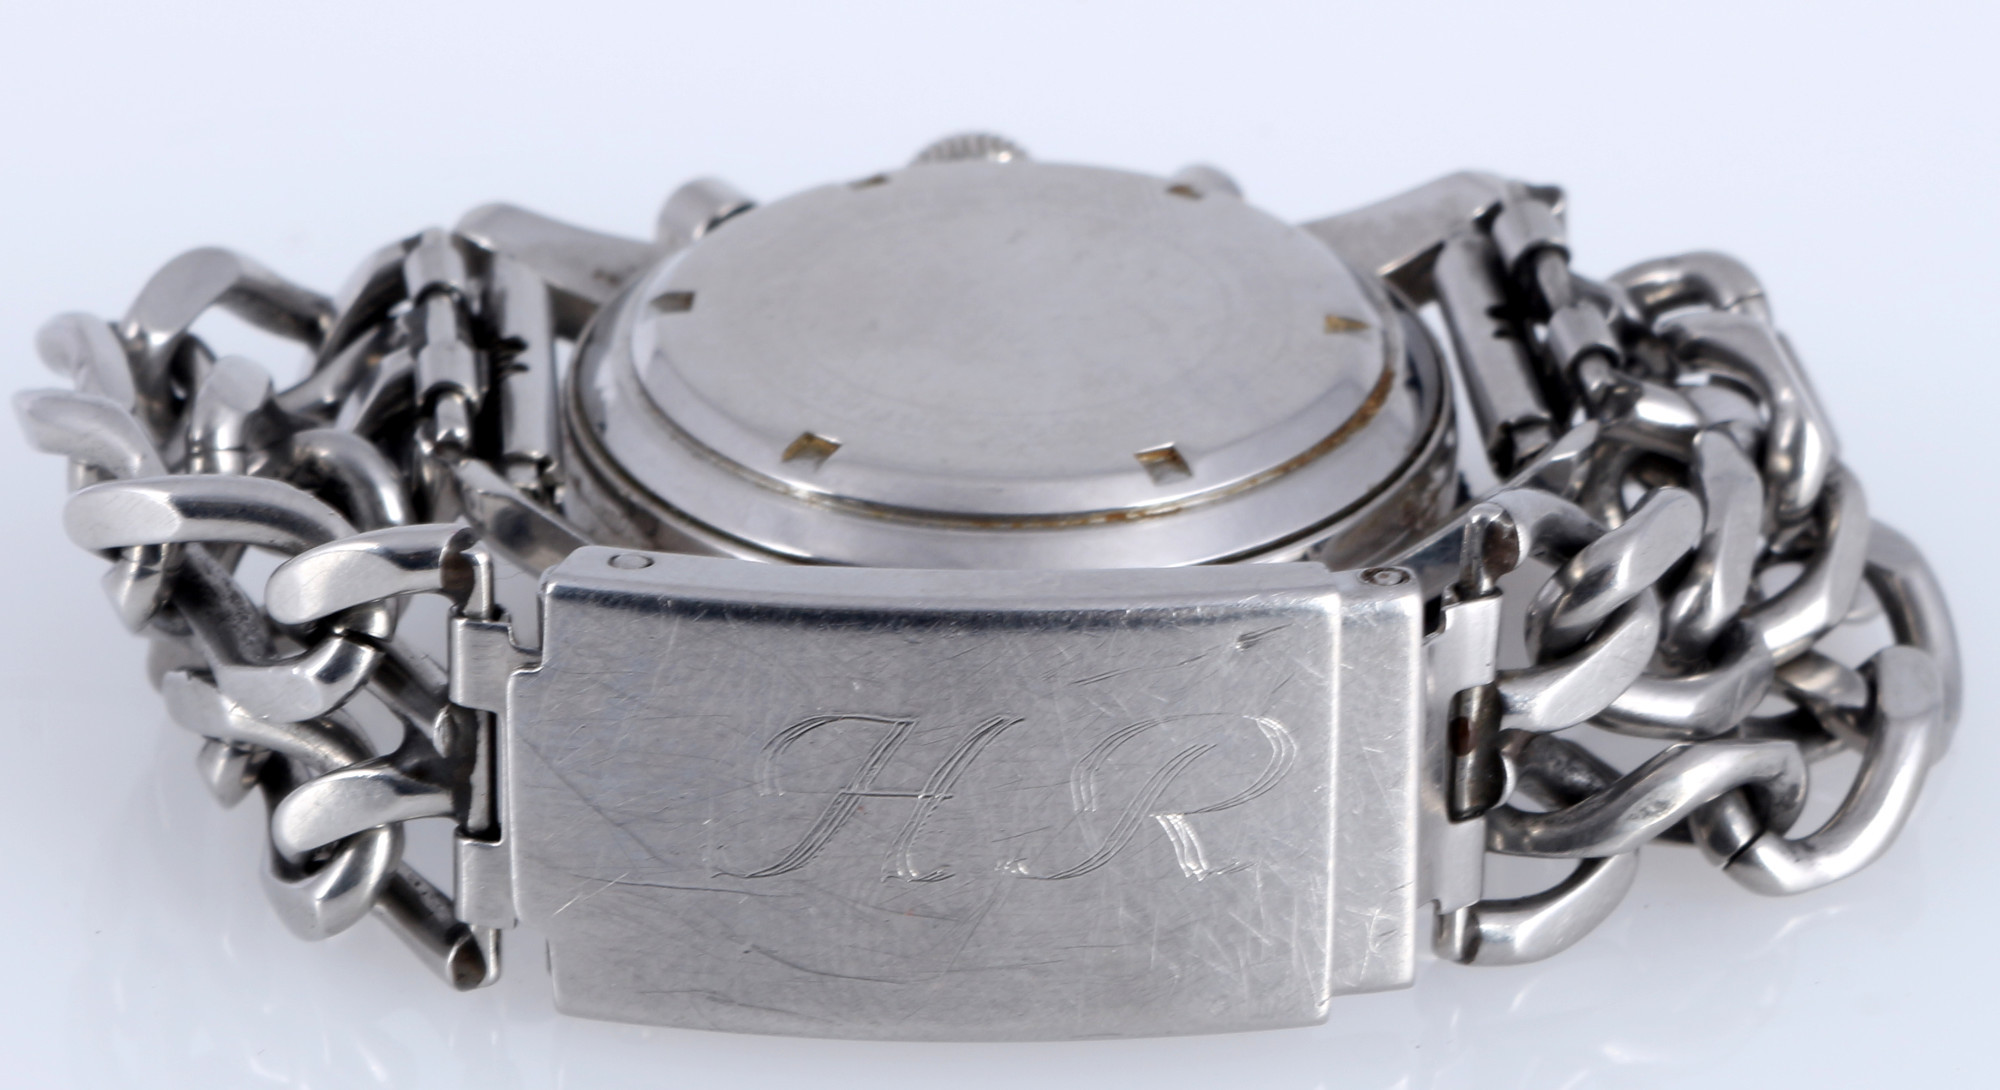 Hanhart Chronograph Pilot's Watch 415 ES with Lemania movement, - Image 7 of 7